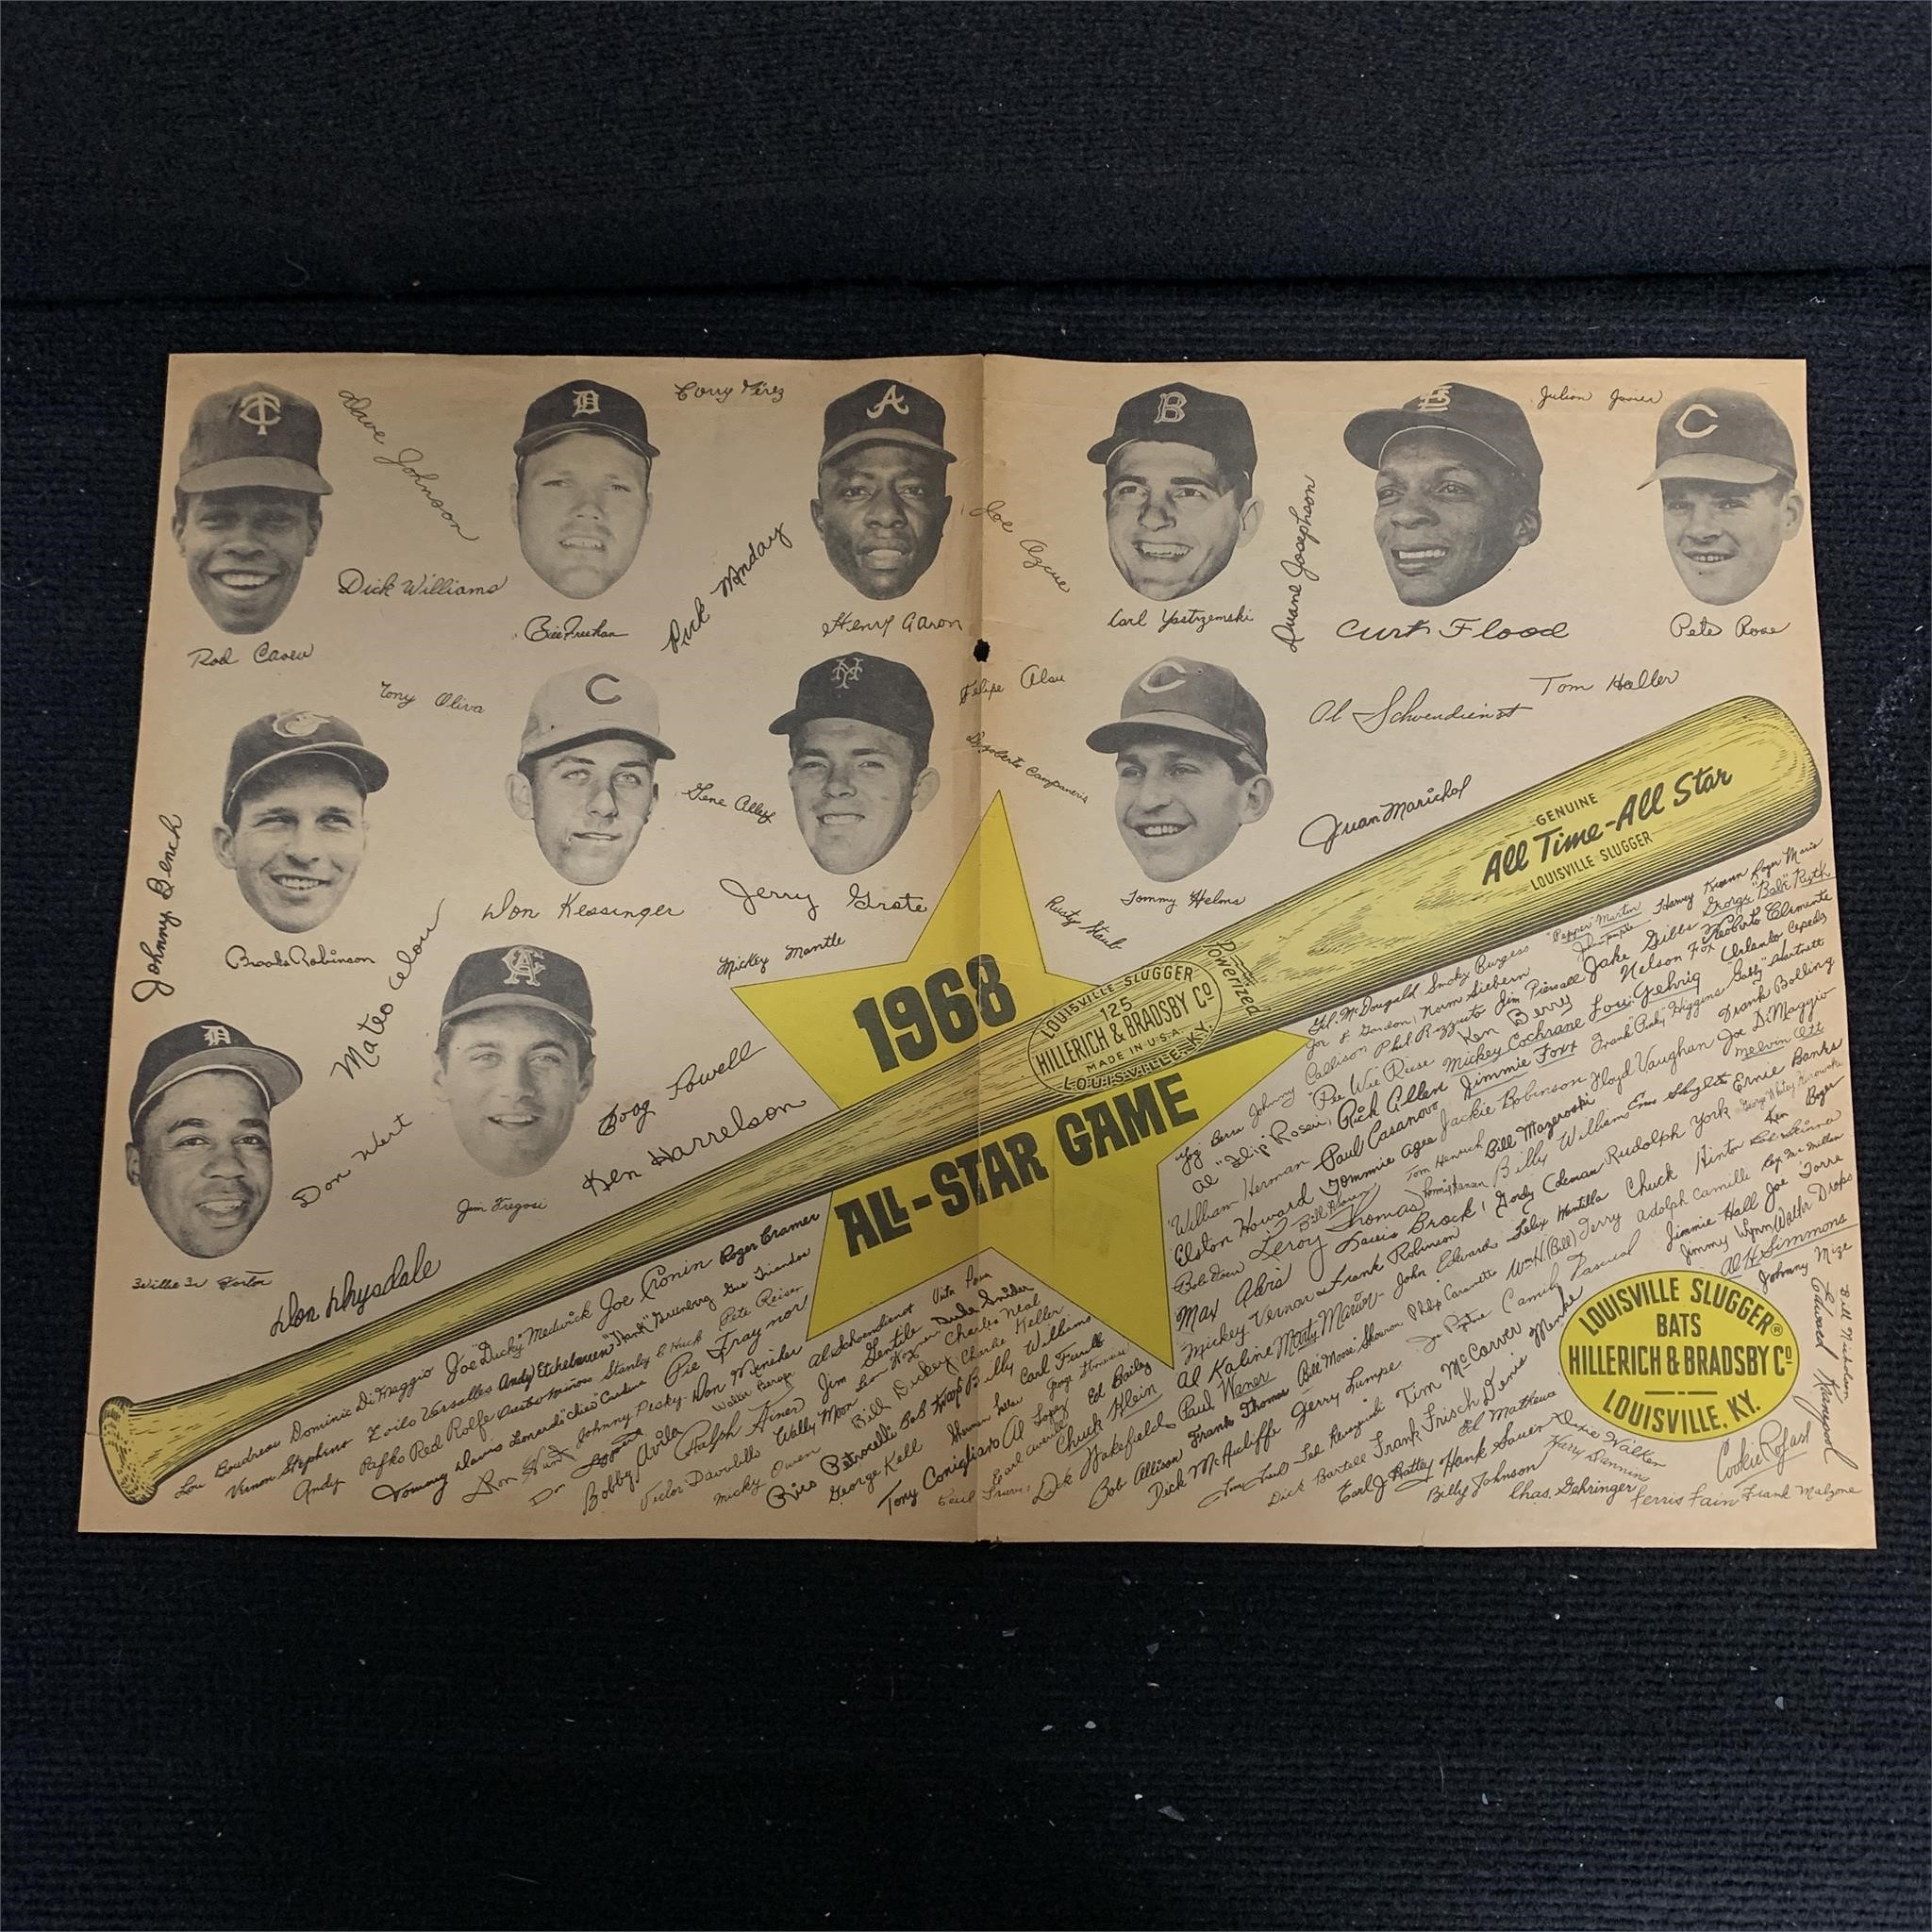 1968 All-Star Game advertisement